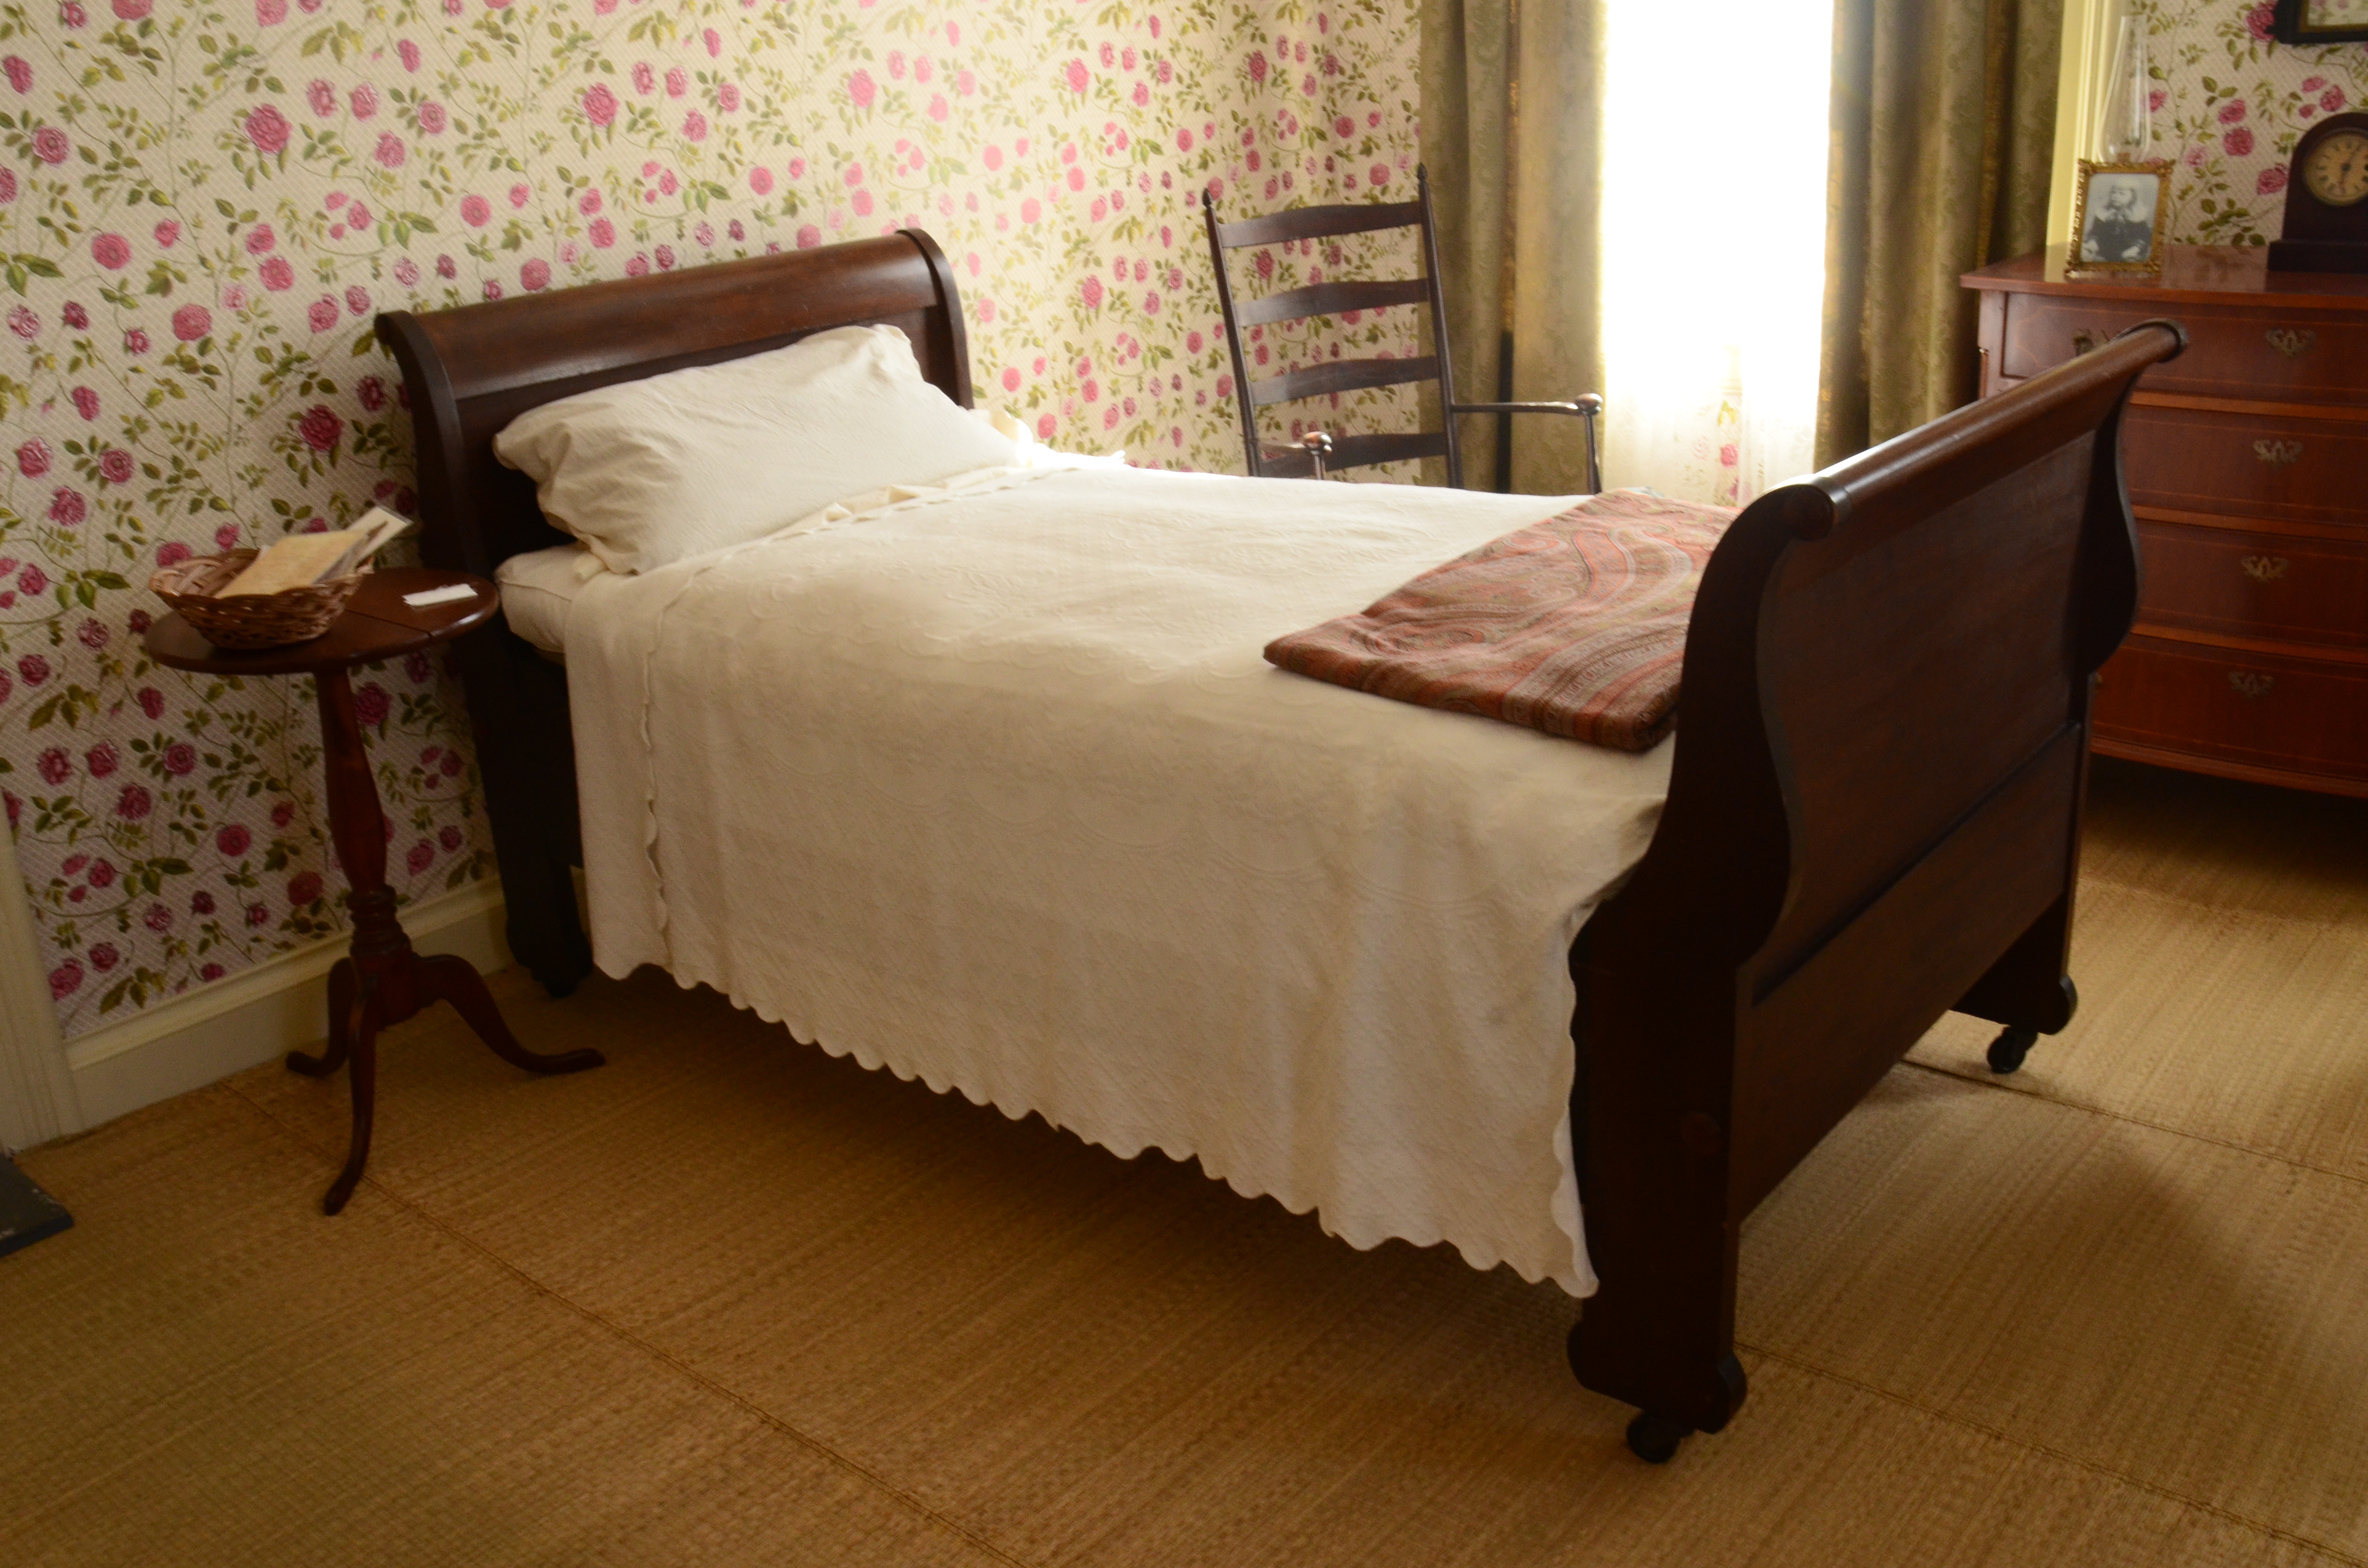 Emily's bedroom, with a bed with a wooden frame and white spread